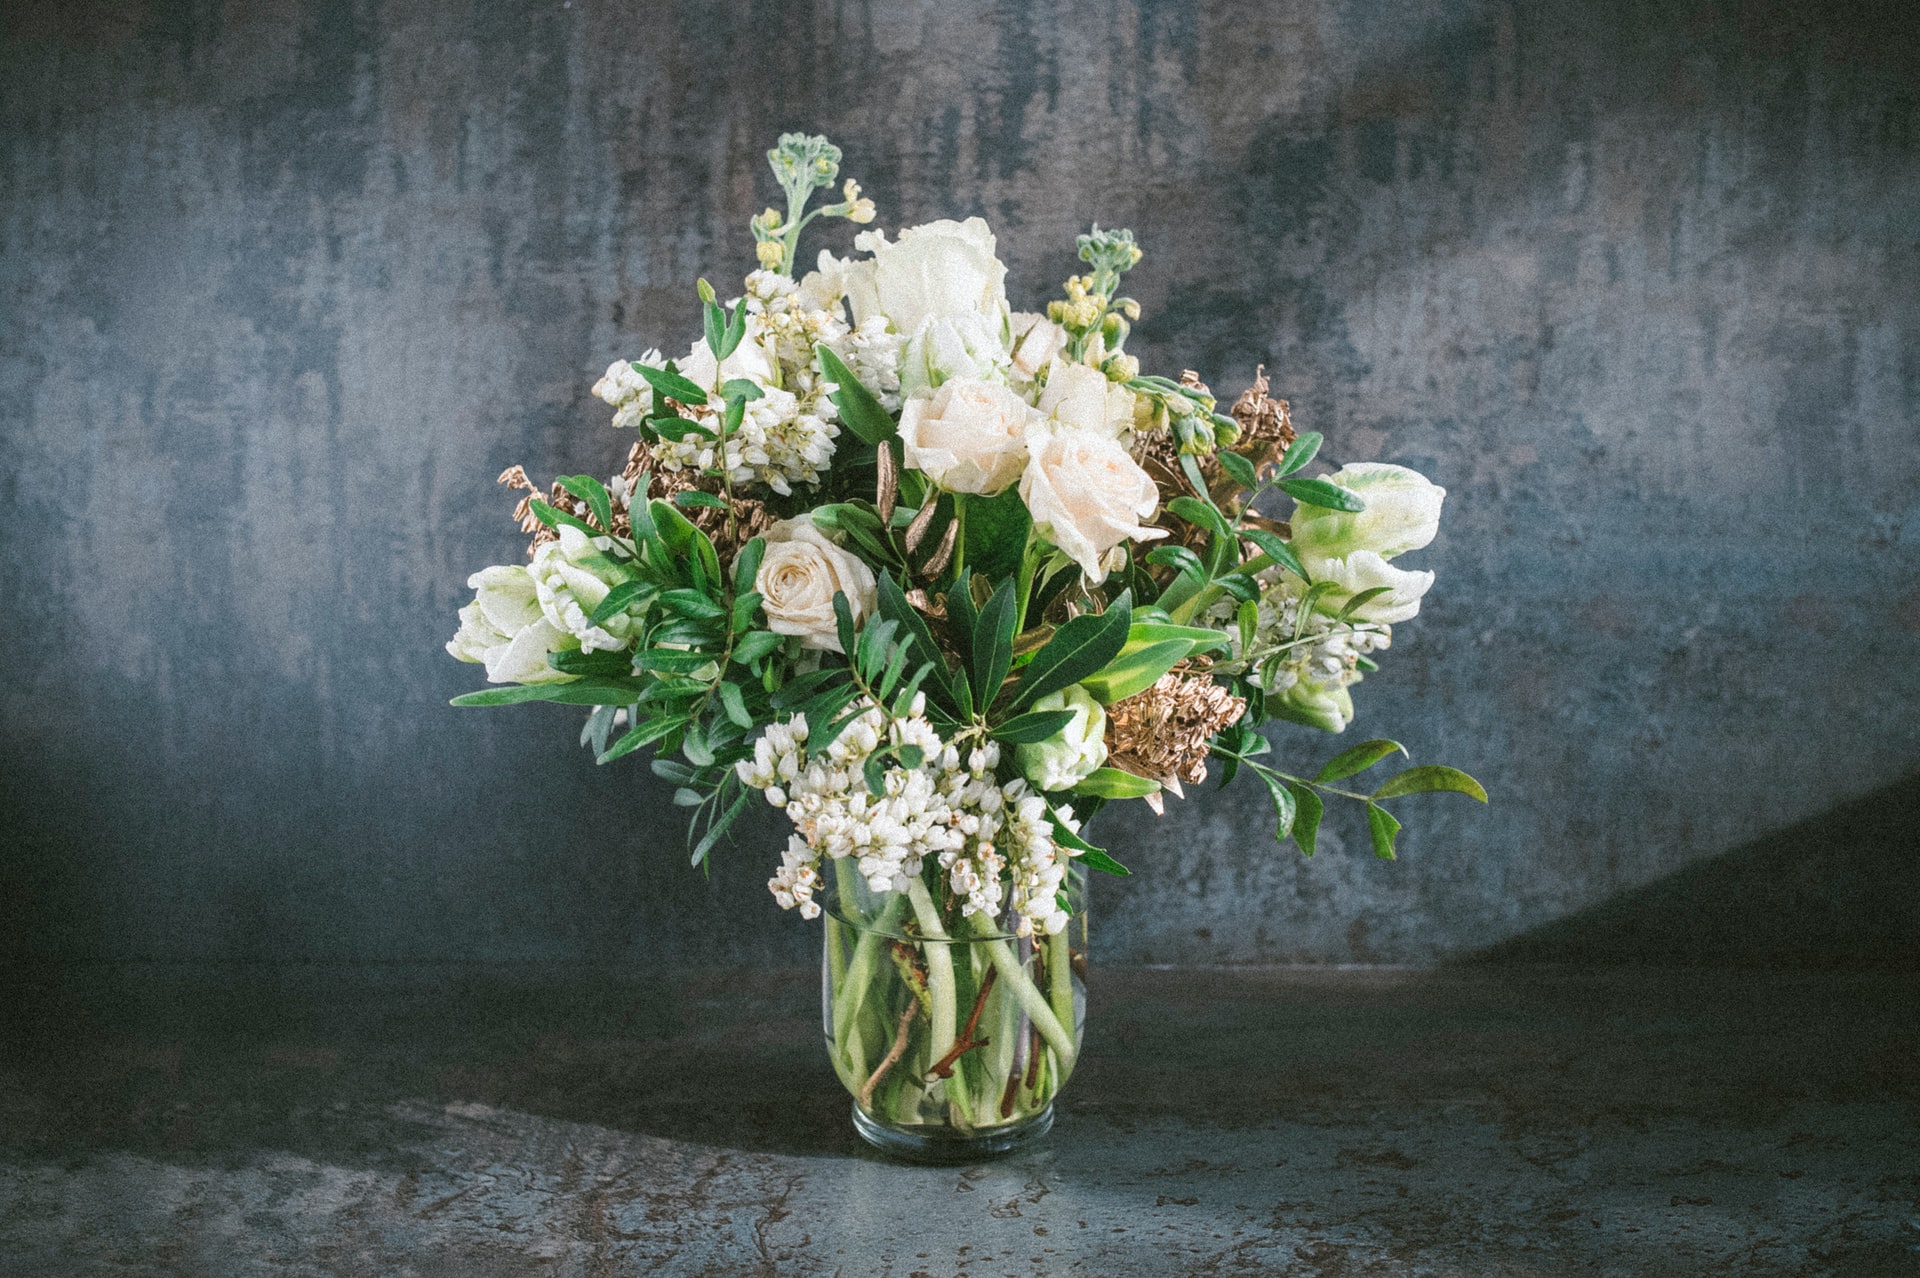 Floristry. What is it and what are its types?